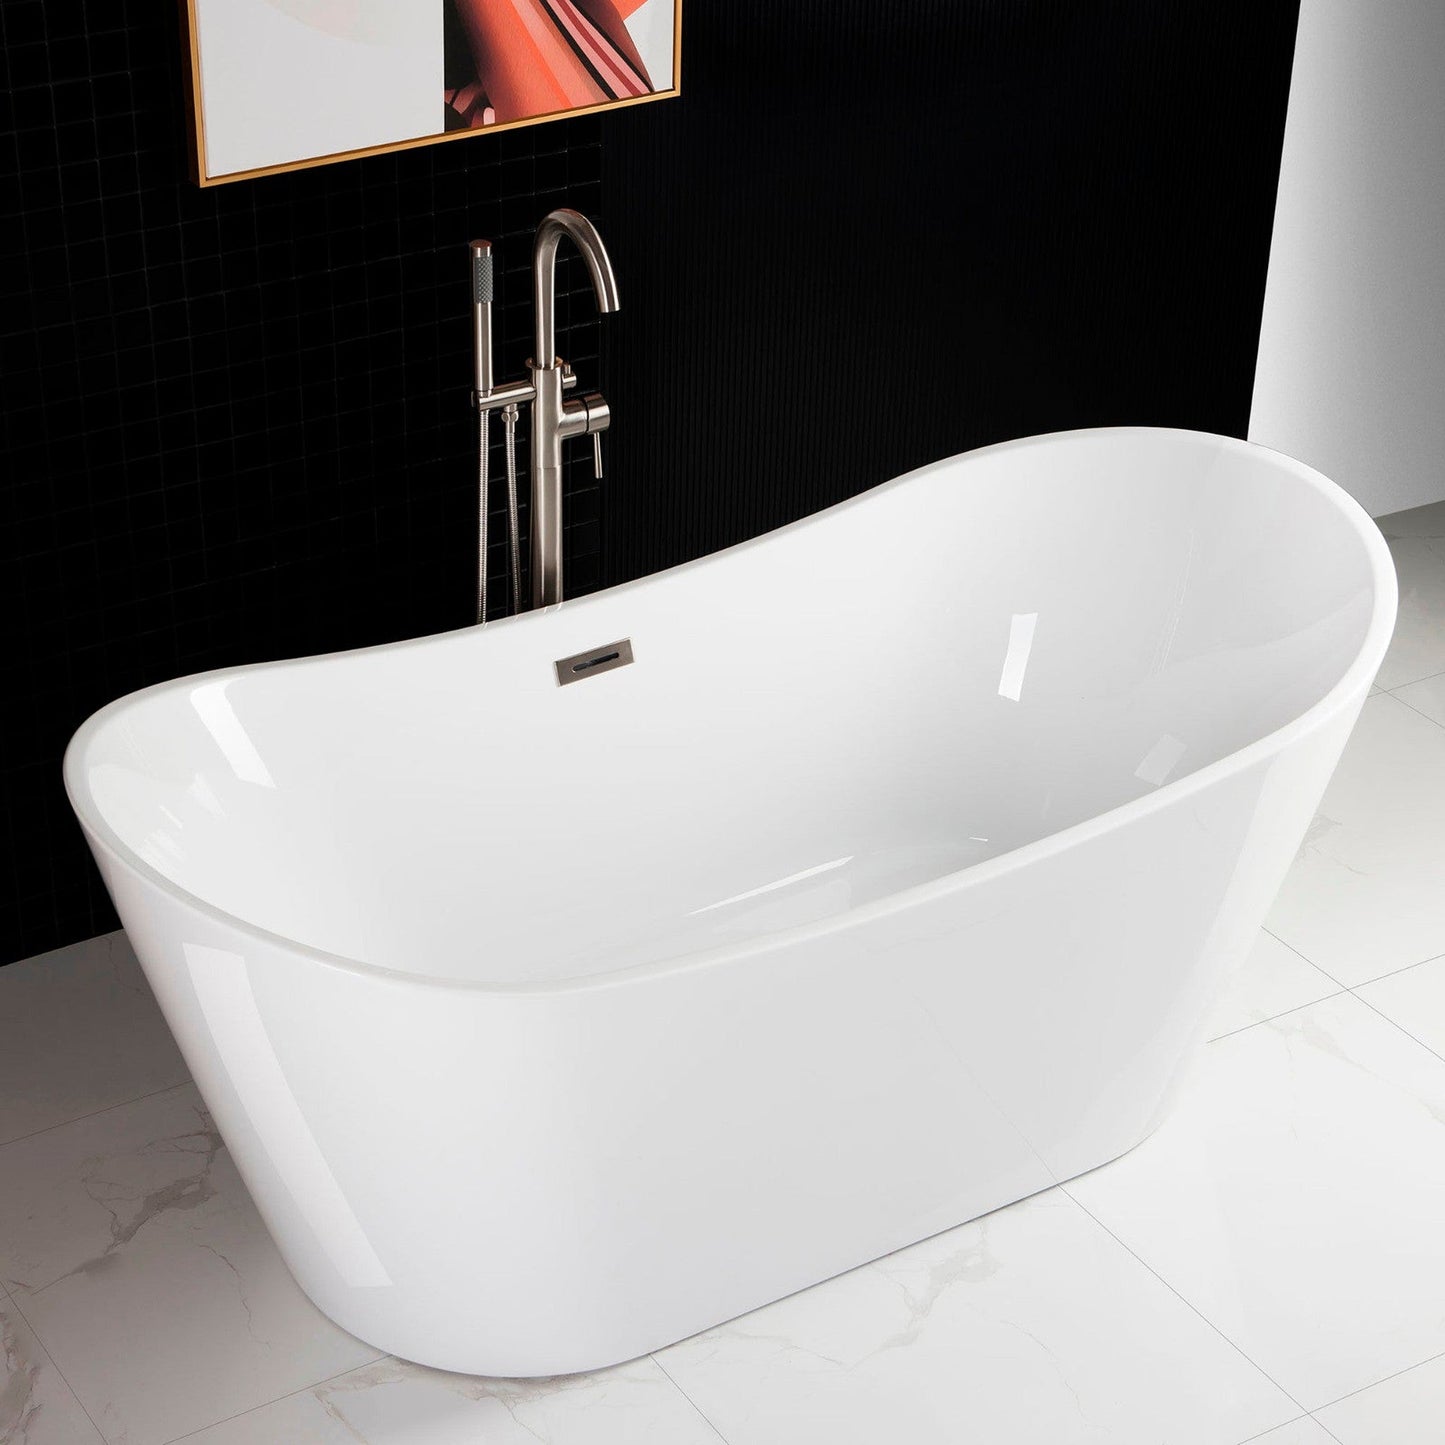 WoodBridge B0010 67" White Acrylic Freestanding Contemporary Soaking Bathtub With Chrome Drain, Overflow, F-0017CH Tub Filler and Caddy Tray